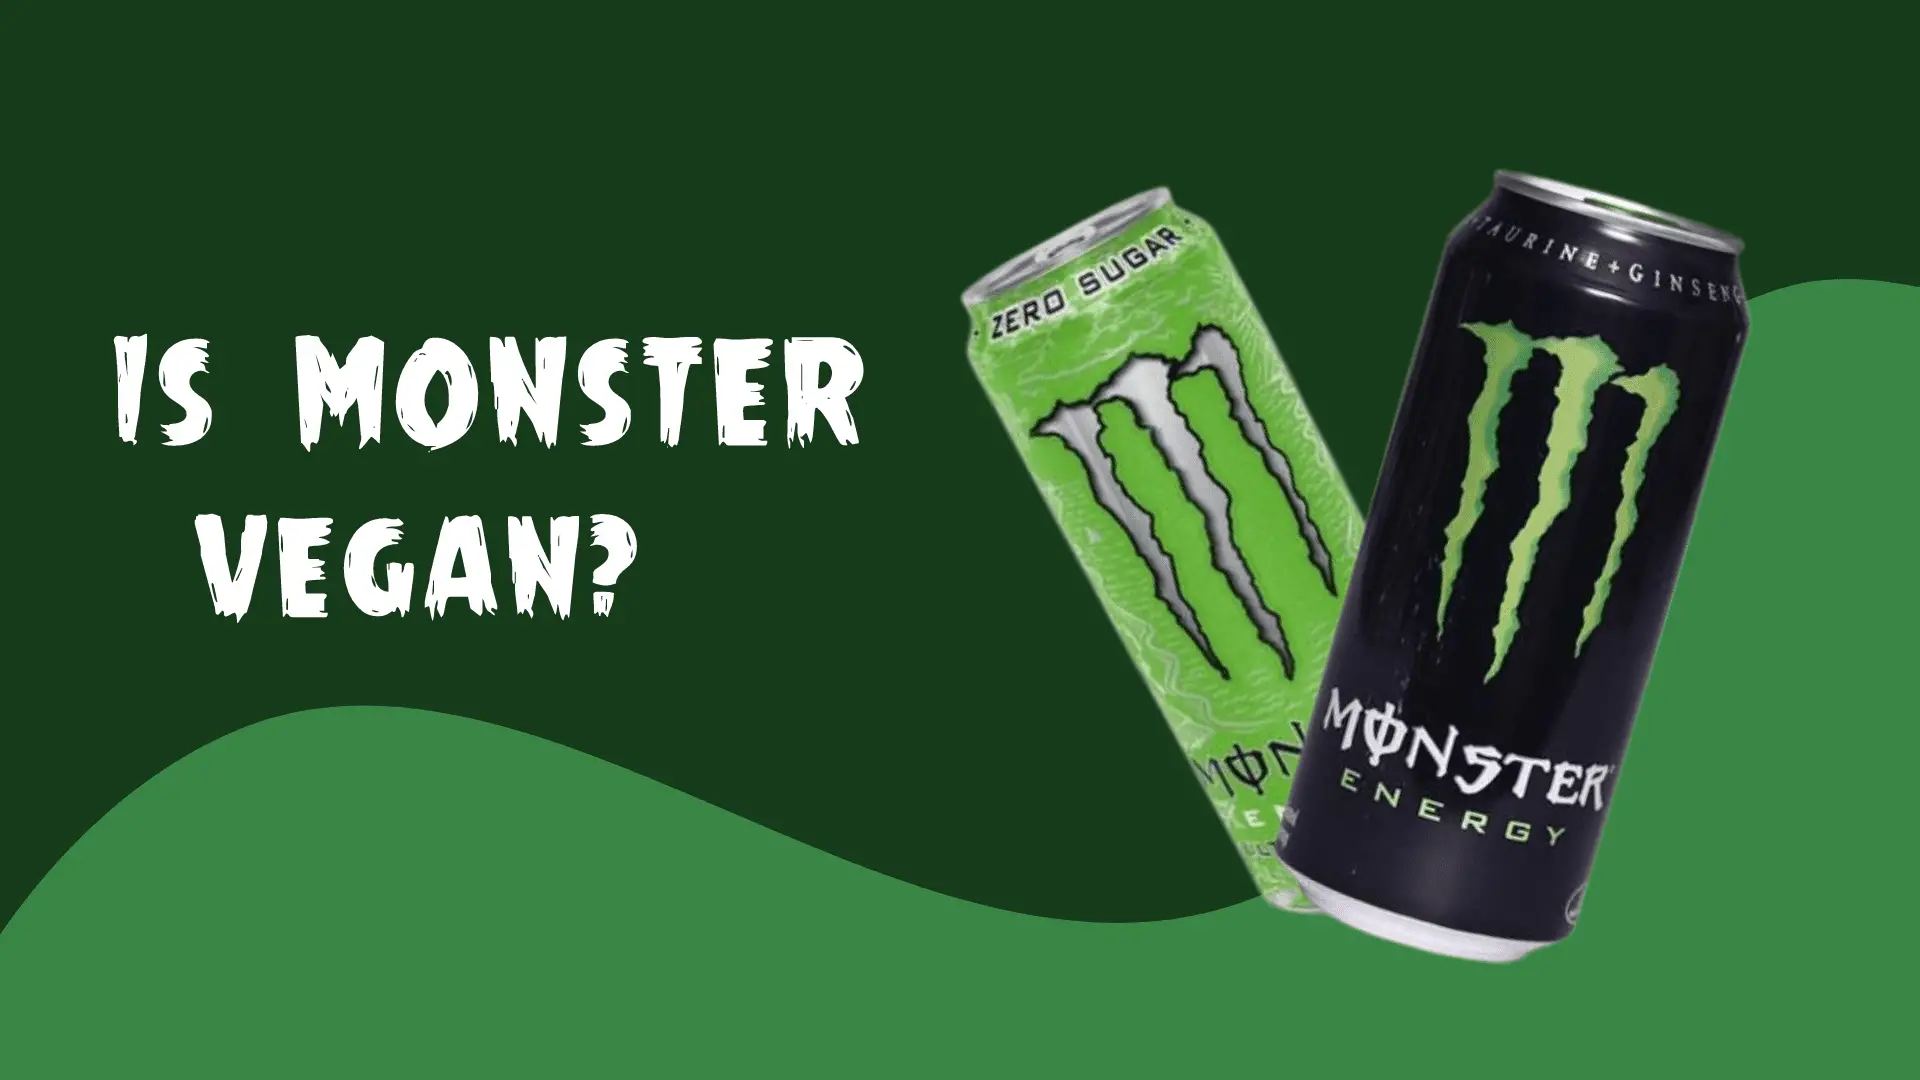 Monster energy drink with Is Monster Vegan written in the text